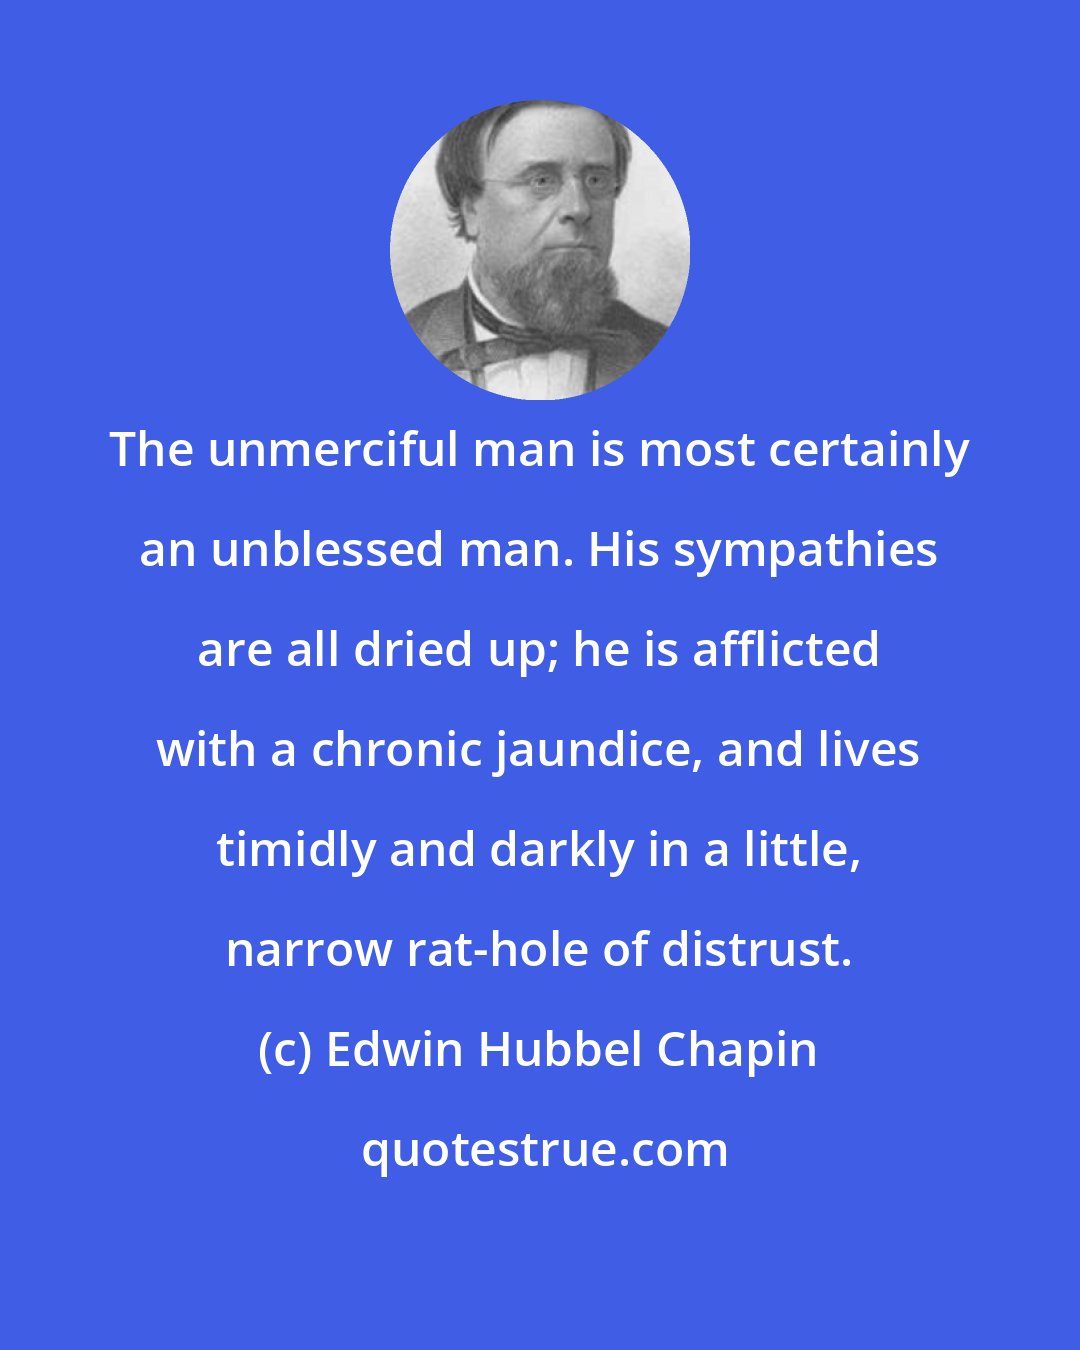 Edwin Hubbel Chapin: The unmerciful man is most certainly an unblessed man. His sympathies are all dried up; he is afflicted with a chronic jaundice, and lives timidly and darkly in a little, narrow rat-hole of distrust.